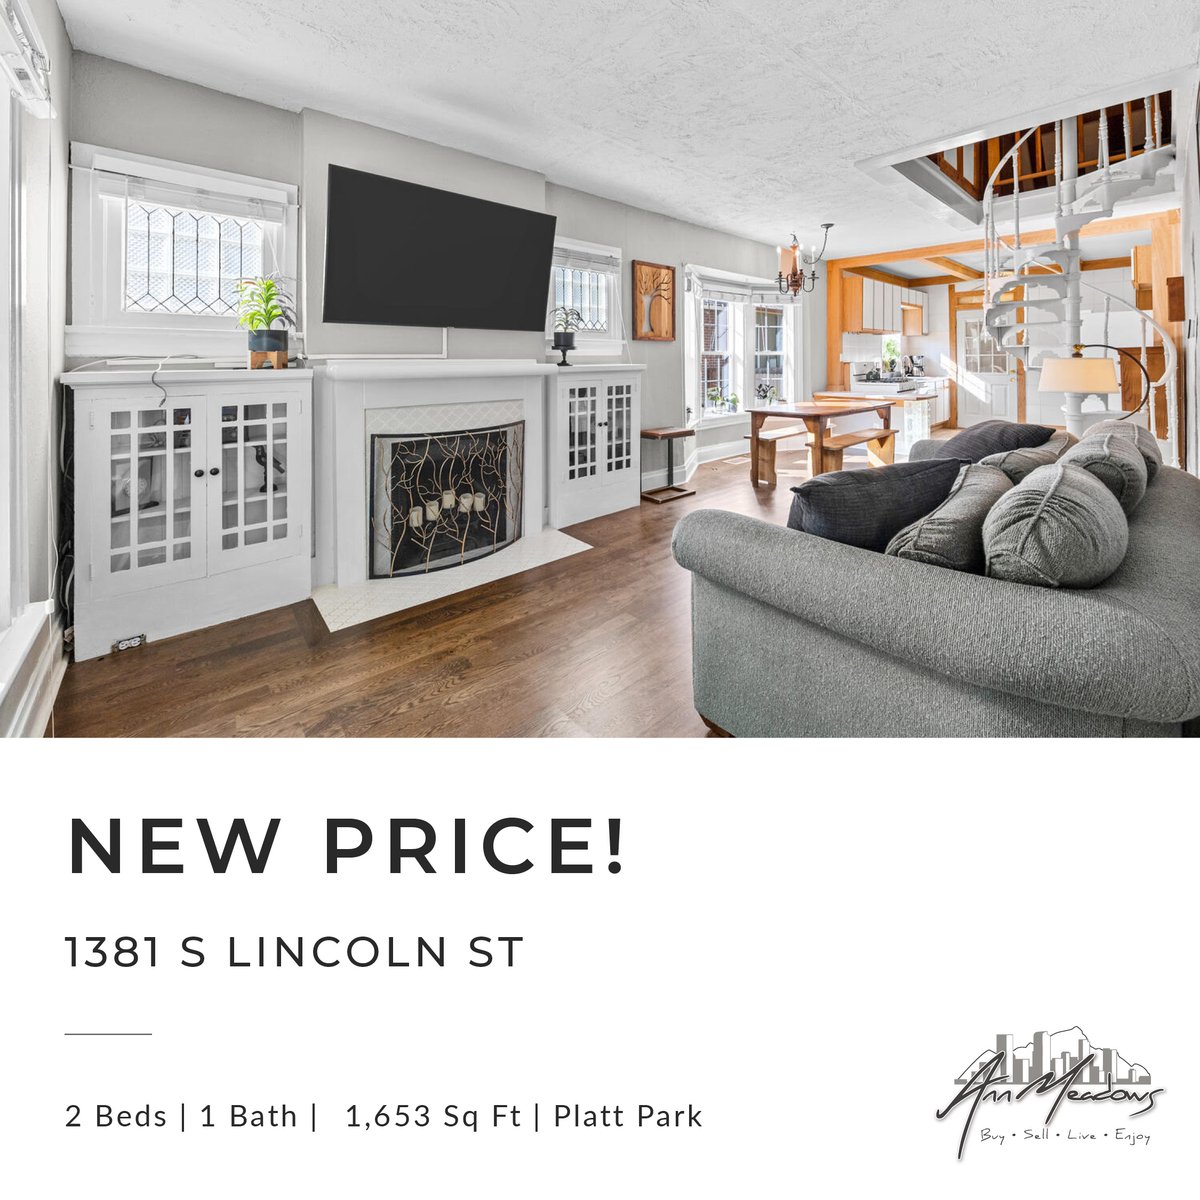 Don’t miss out! We just lowered the price on this fantastic #PlattPark bungalow, so now’s your chance to get in! Feel free to reach out with any questions. #denverbungalow #plattparkdenver #denverrealestate #denverhome #remax #sellyeah